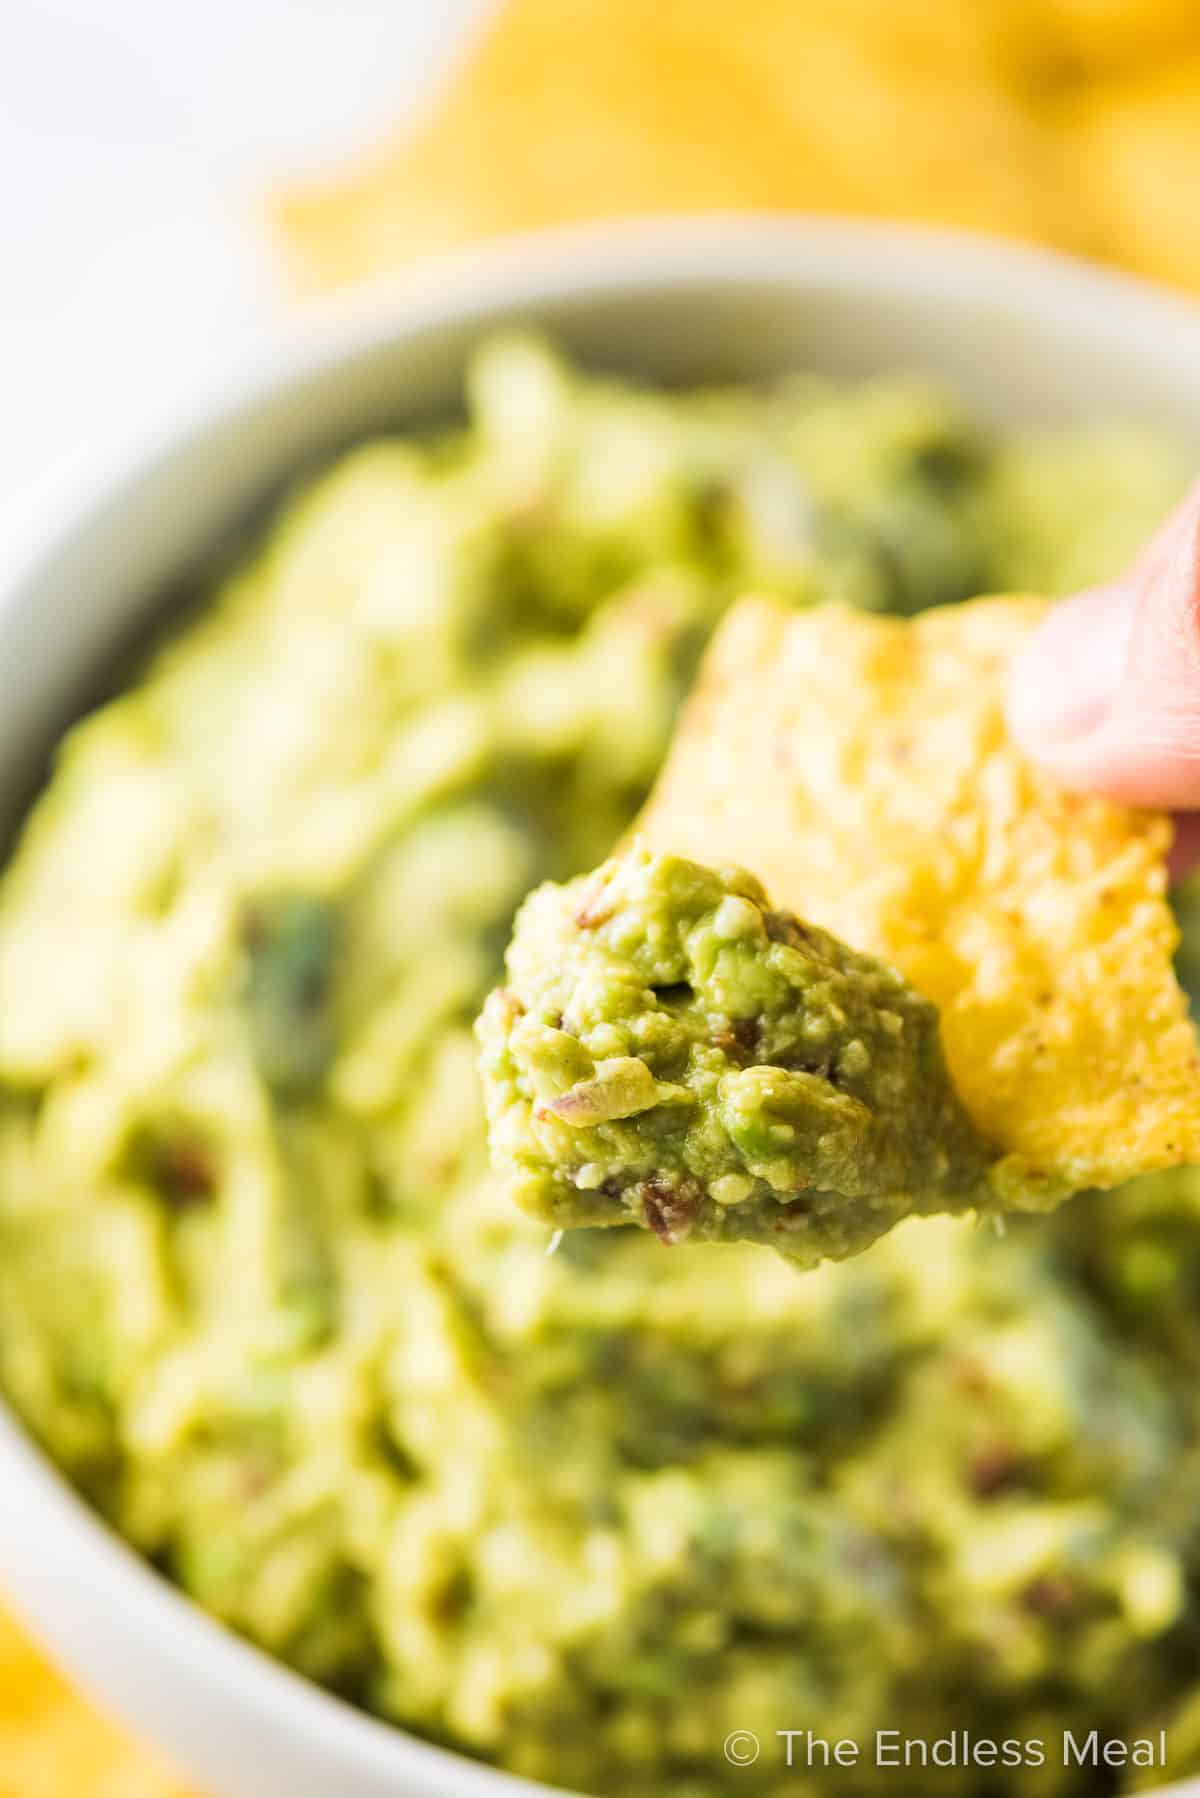 A tortilla chip scooping some chipotle guacamole dip.